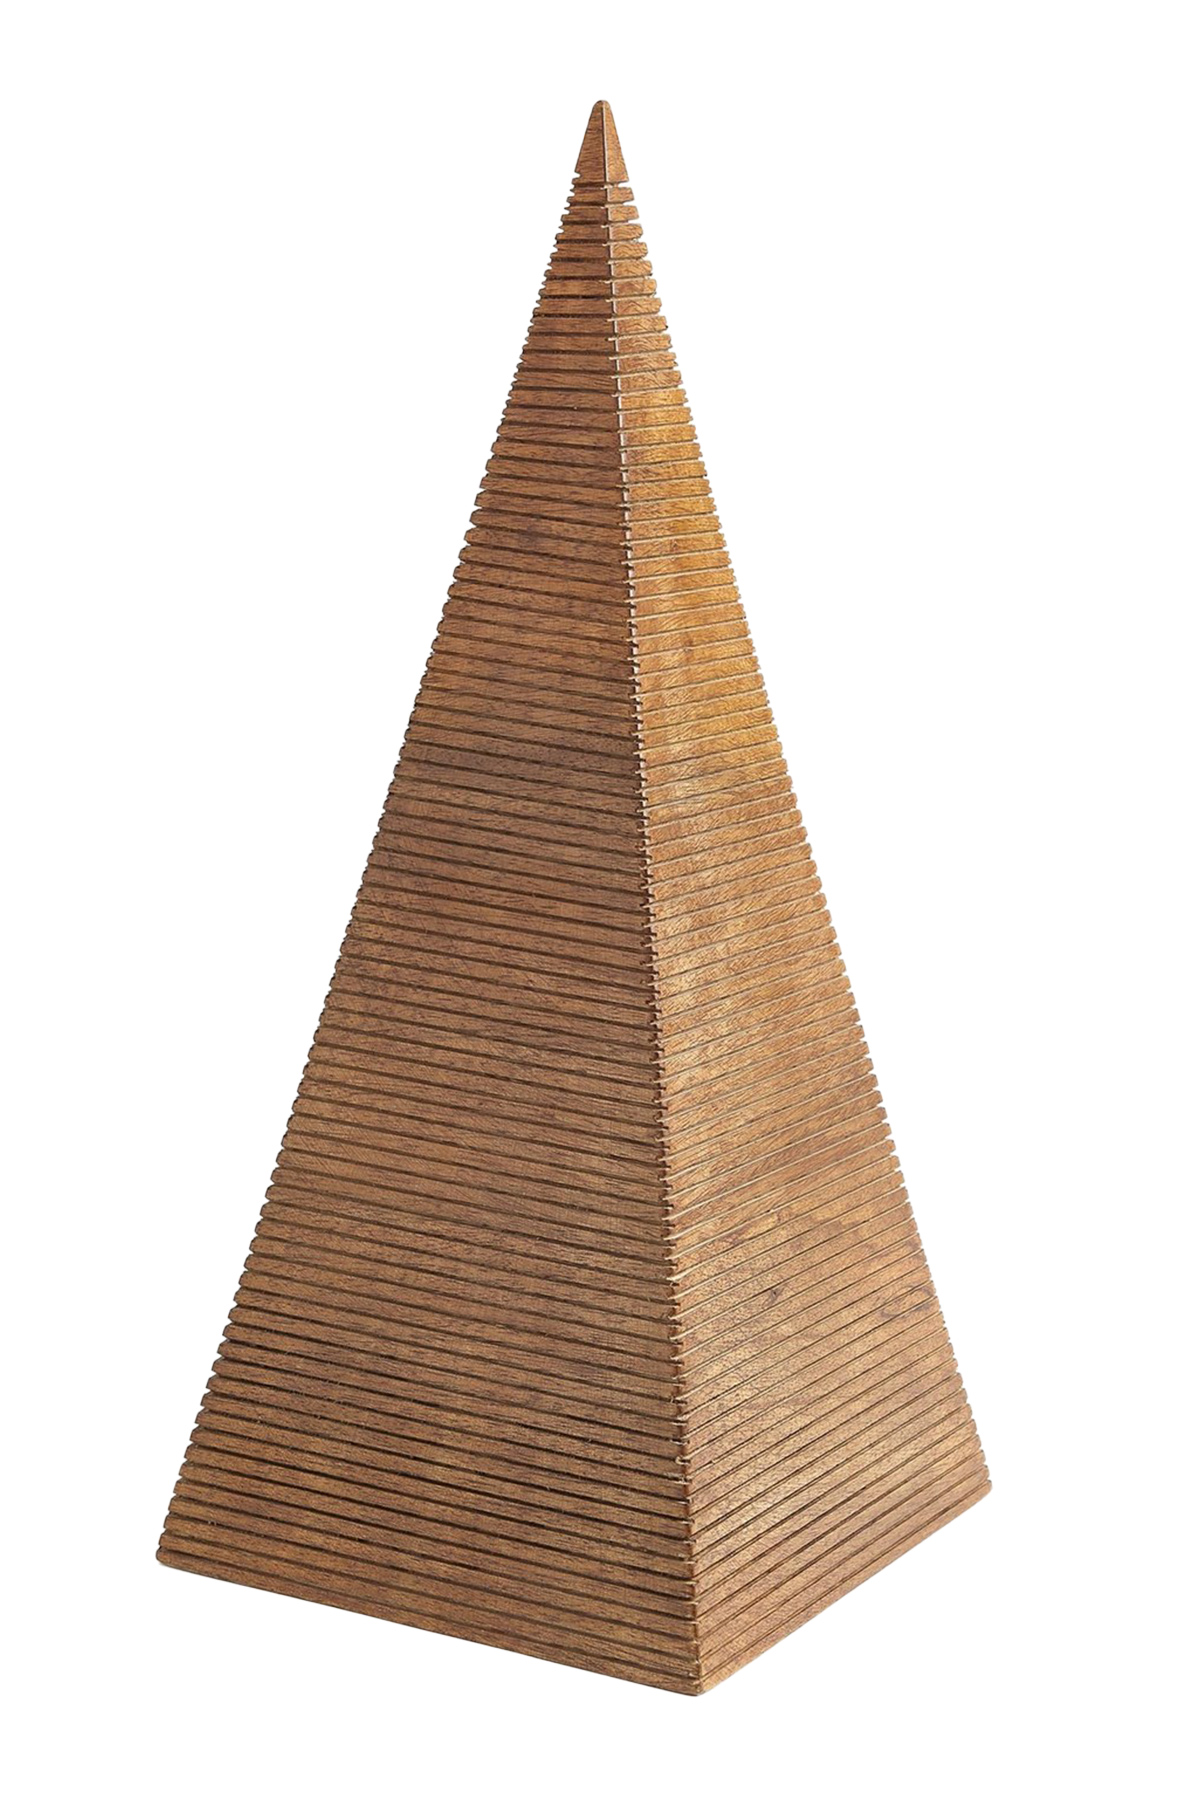 Global Views Beaumont Wooden Pyramid from Dallas Market Center